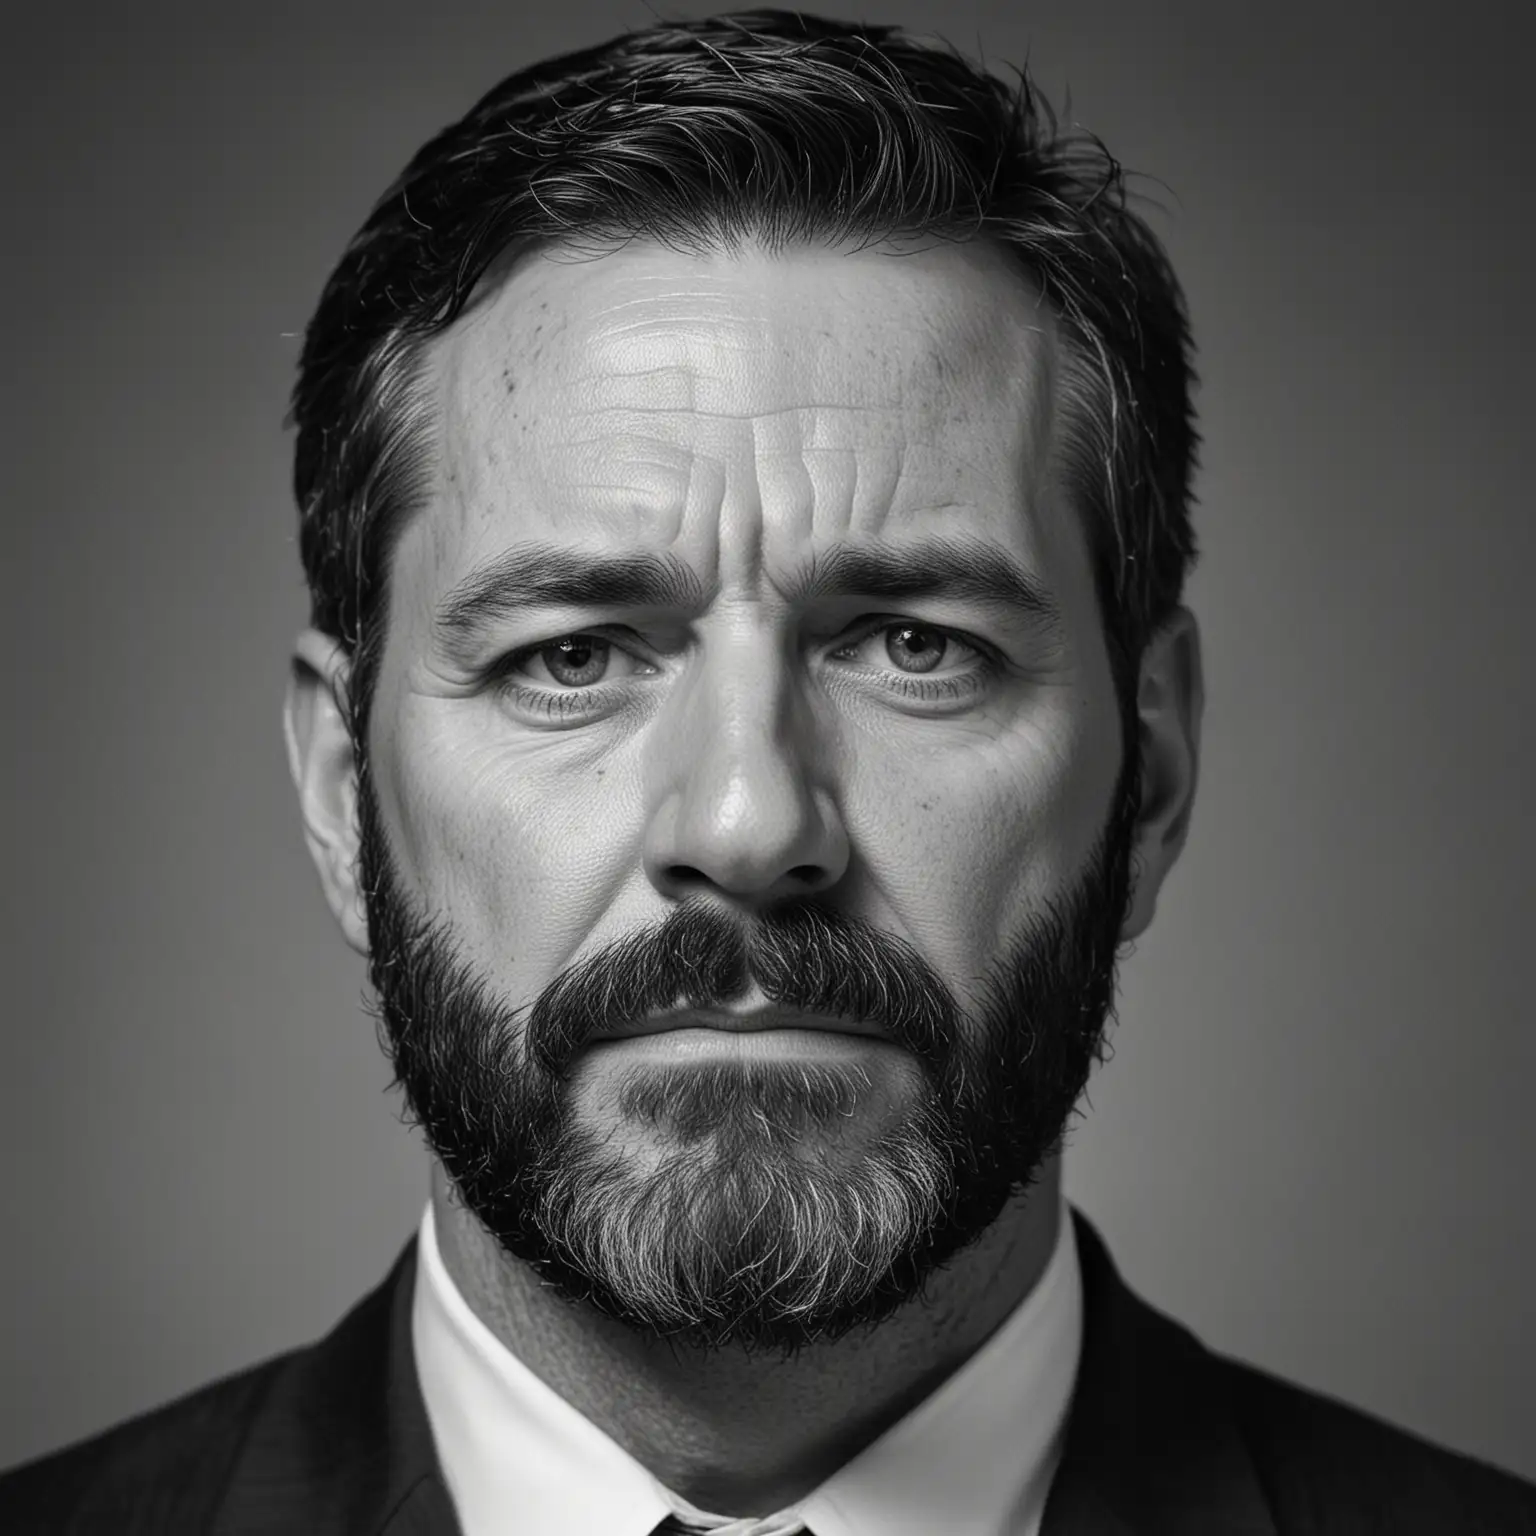 A federal agent in his early 50s with a close cropped beard, he has a blank and dead eyed expression. Grayscale image.